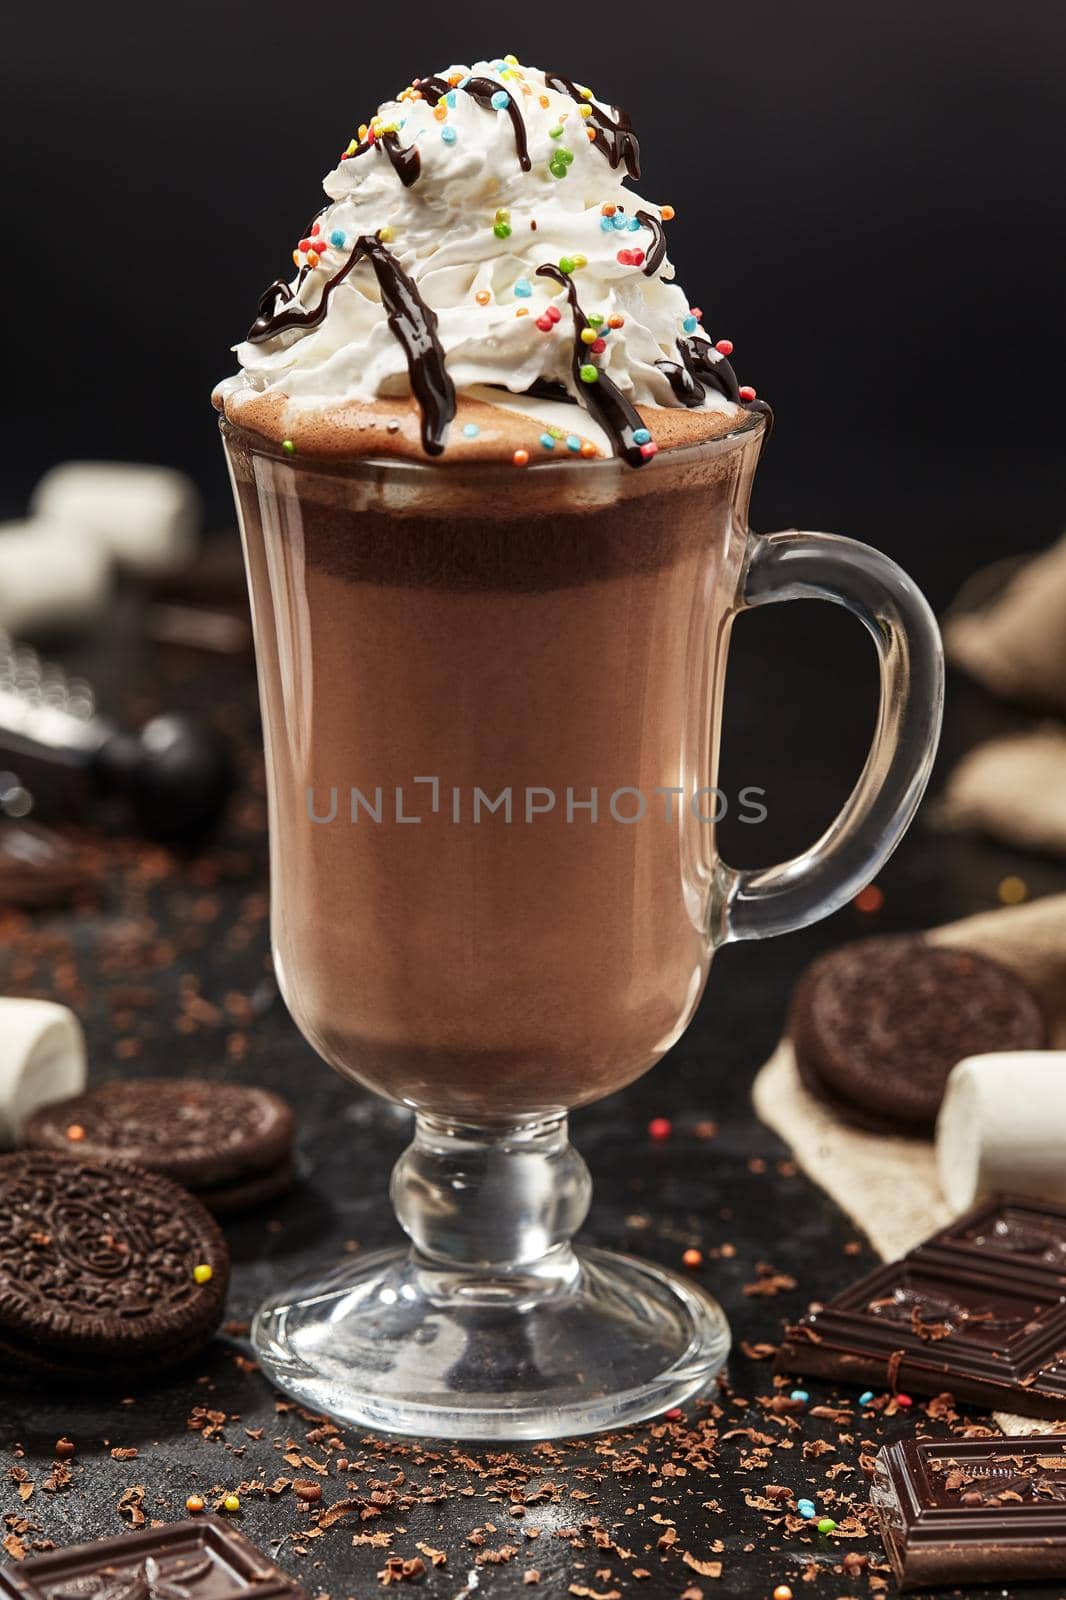 Delicious aromatic hot chocolate with whipped cream topped with colorful sprinkles in glass cup on black table with cookies, pieces of chocolate and marshmallows